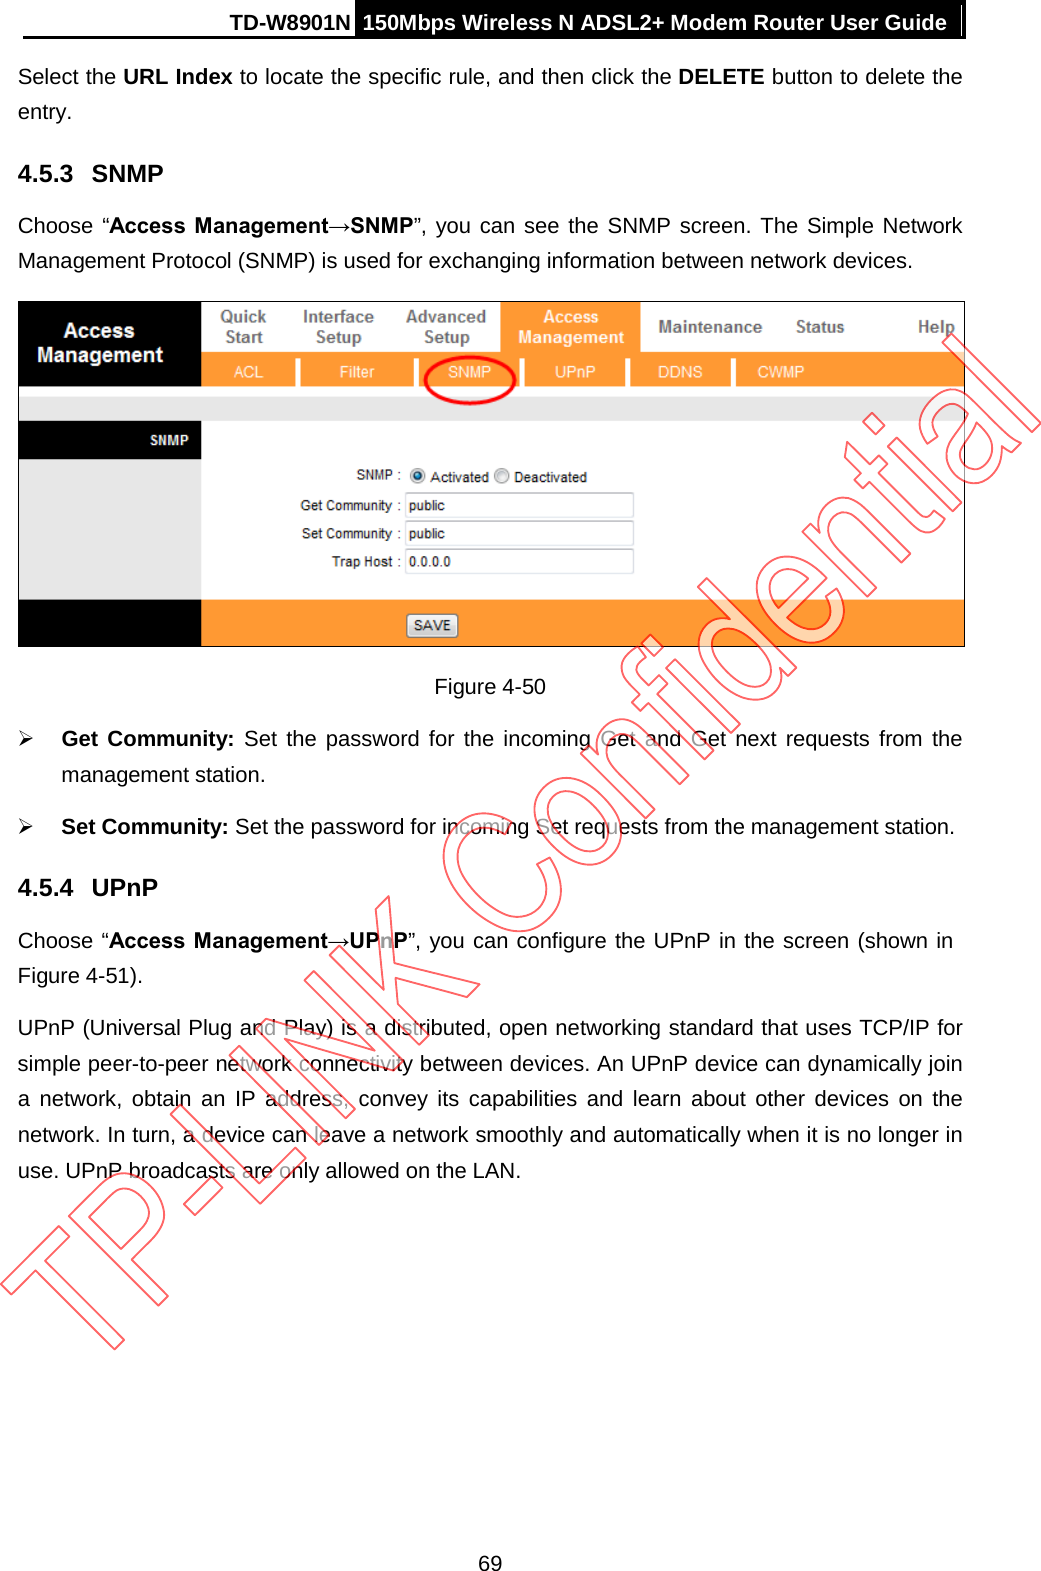 TD-W8901N 150Mbps Wireless N ADSL2+ Modem Router User Guide  Select the URL Index to locate the specific rule, and then click the DELETE button to delete the entry. 4.5.3 SNMP Choose “Access  Management→SNMP”, you can see the SNMP screen. The Simple Network Management Protocol (SNMP) is used for exchanging information between network devices.  Figure 4-50  Get Community: Set the password for the incoming Get and Get next requests from the management station.  Set Community: Set the password for incoming Set requests from the management station. 4.5.4 UPnP Choose “Access Management→UPnP”, you can configure the UPnP in the screen (shown in Figure 4-51). UPnP (Universal Plug and Play) is a distributed, open networking standard that uses TCP/IP for simple peer-to-peer network connectivity between devices. An UPnP device can dynamically join a network, obtain an IP address, convey its capabilities and learn about other devices on the network. In turn, a device can leave a network smoothly and automatically when it is no longer in use. UPnP broadcasts are only allowed on the LAN. 69 